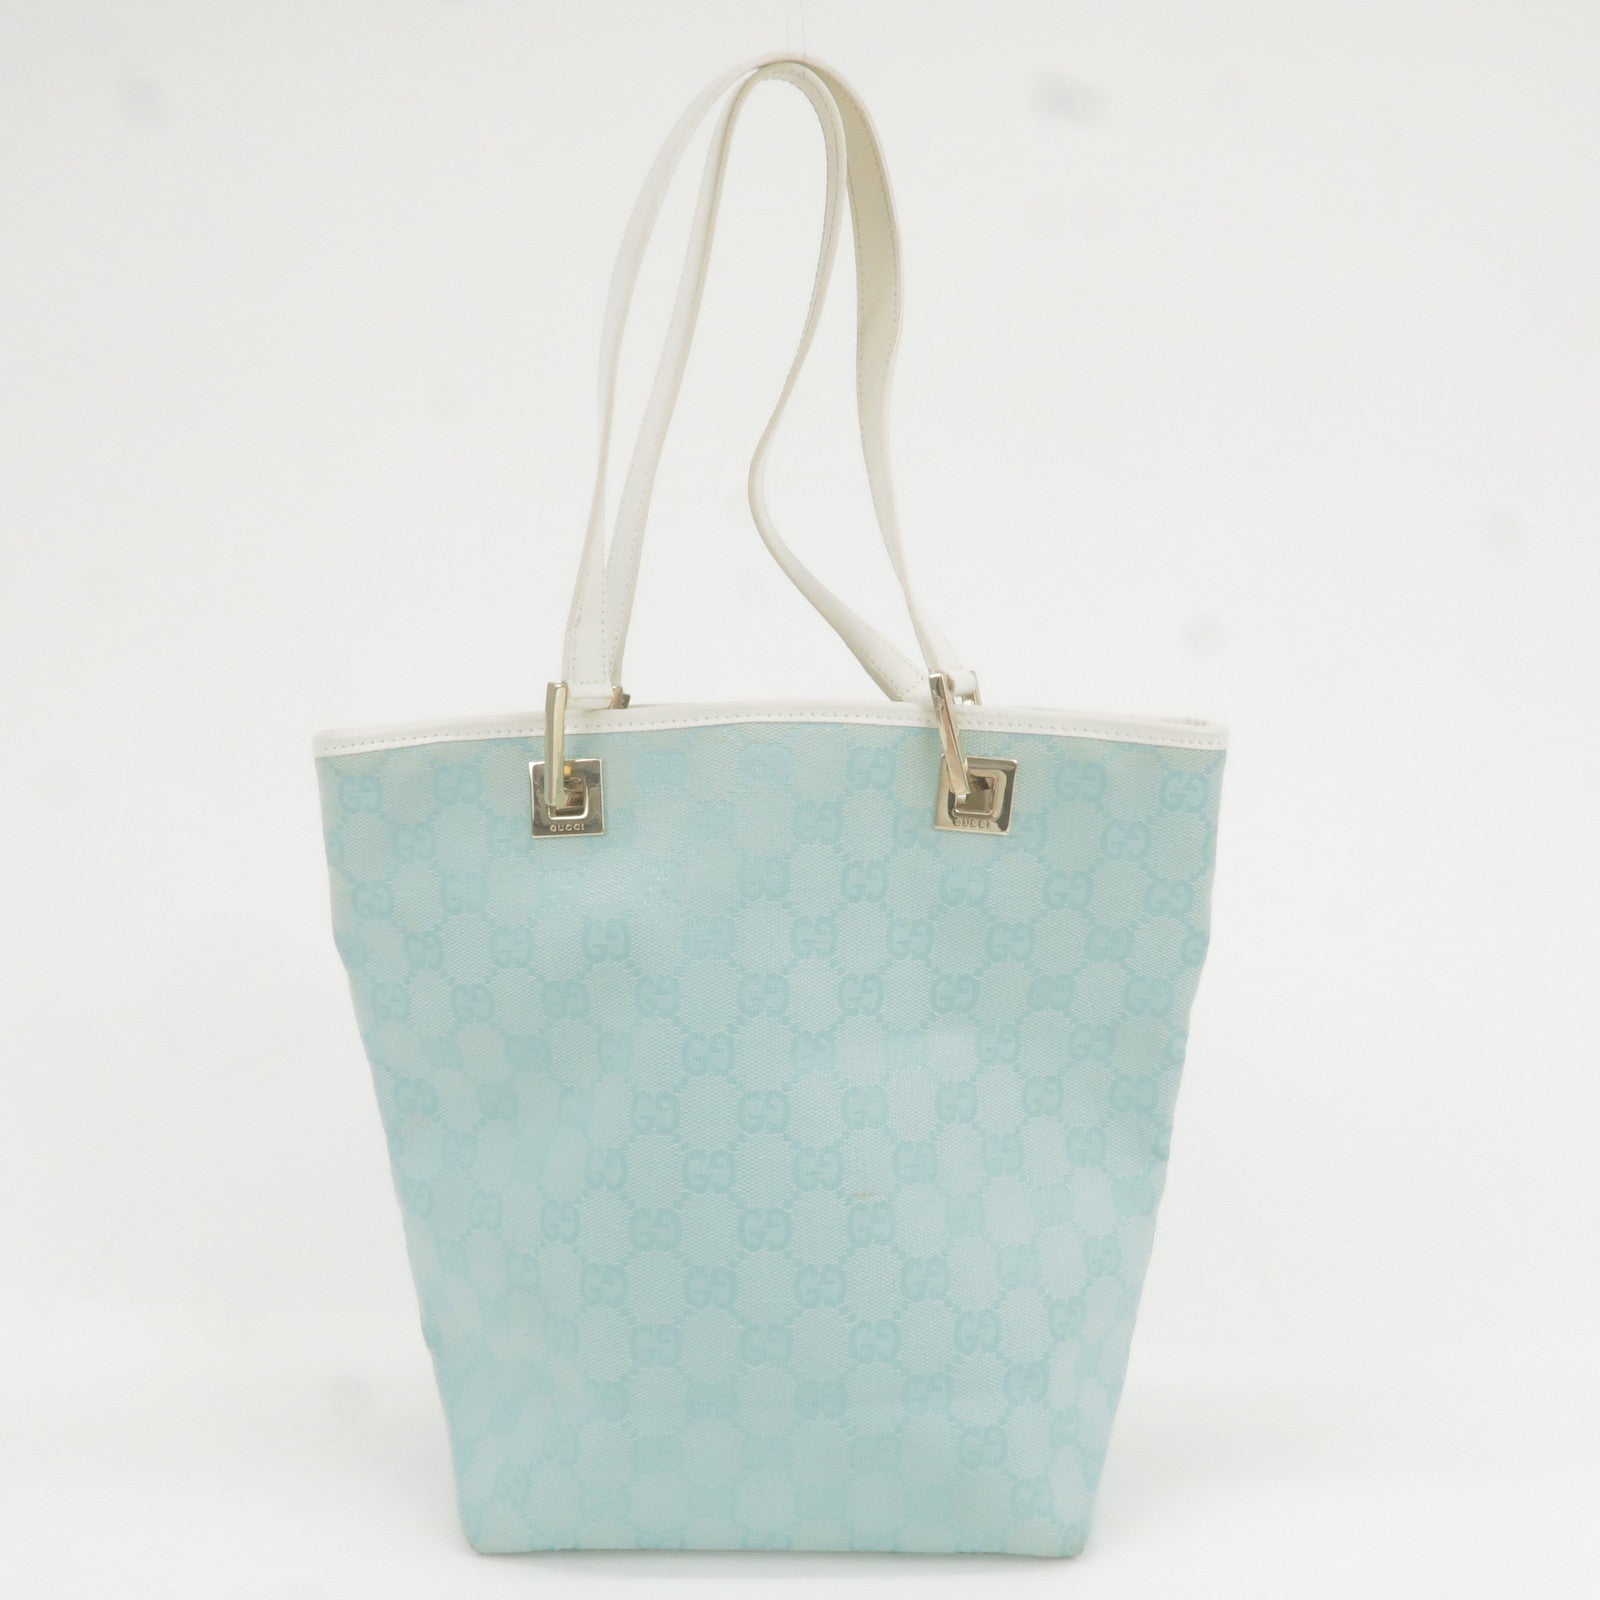 GUCCI-GG-Canvas-Leather-Tote-Bag-Light-Blue-White-002.1099 – dct-ep_vintage  luxury Store